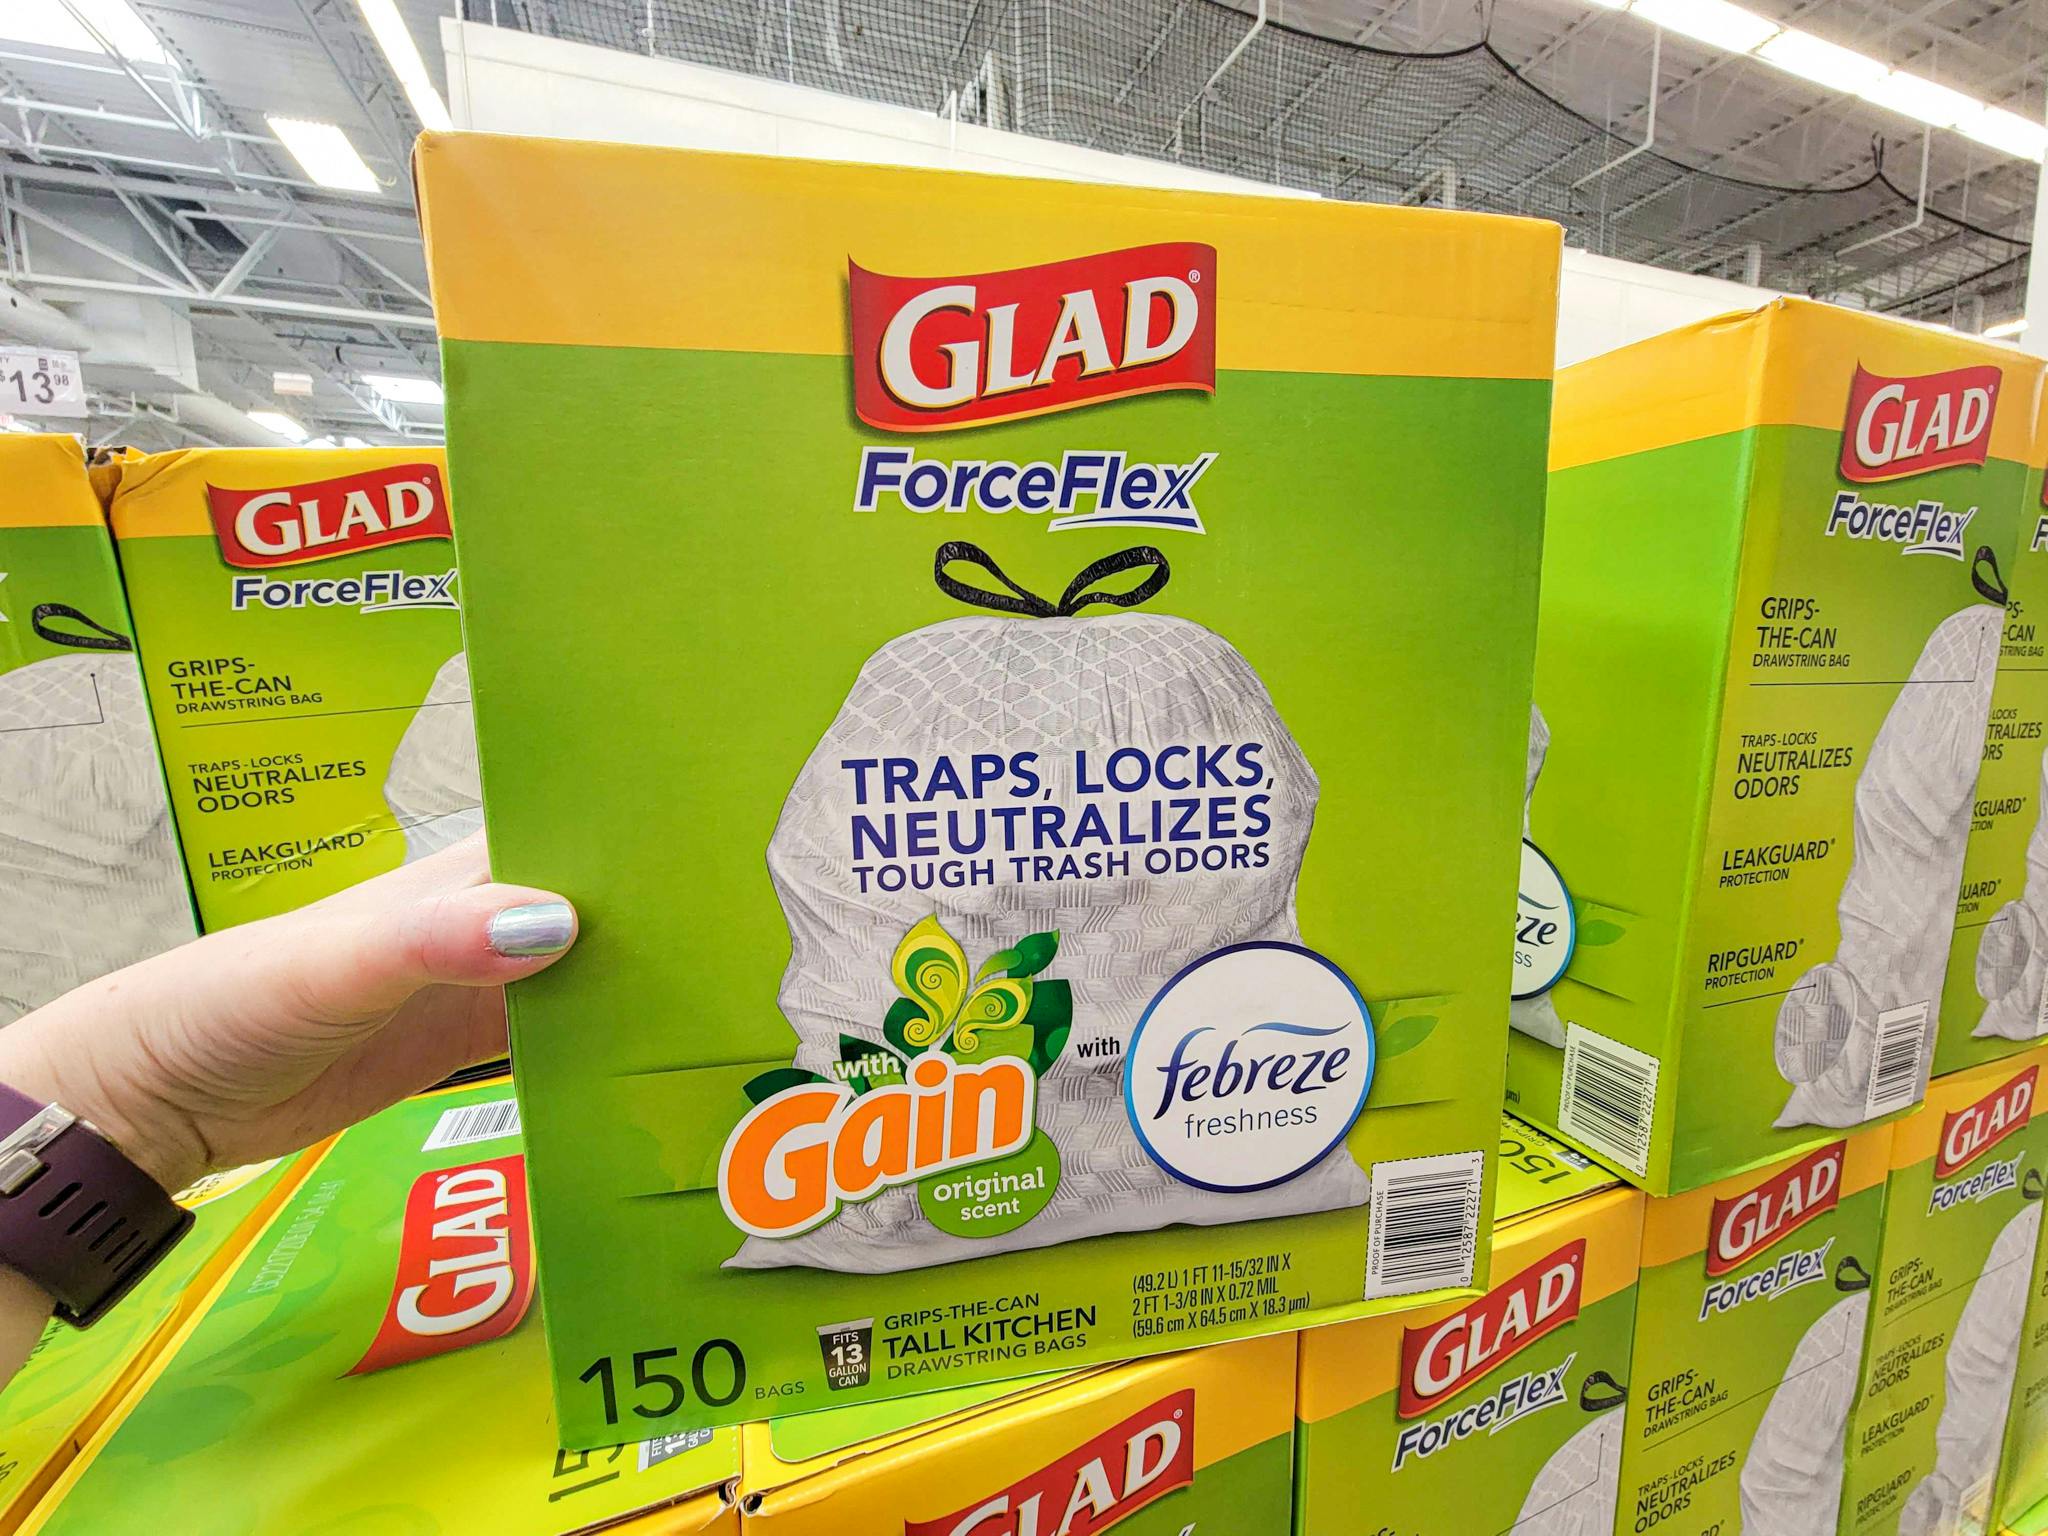 a large box of Glad ForceFlex trash bags that are Gain scented.